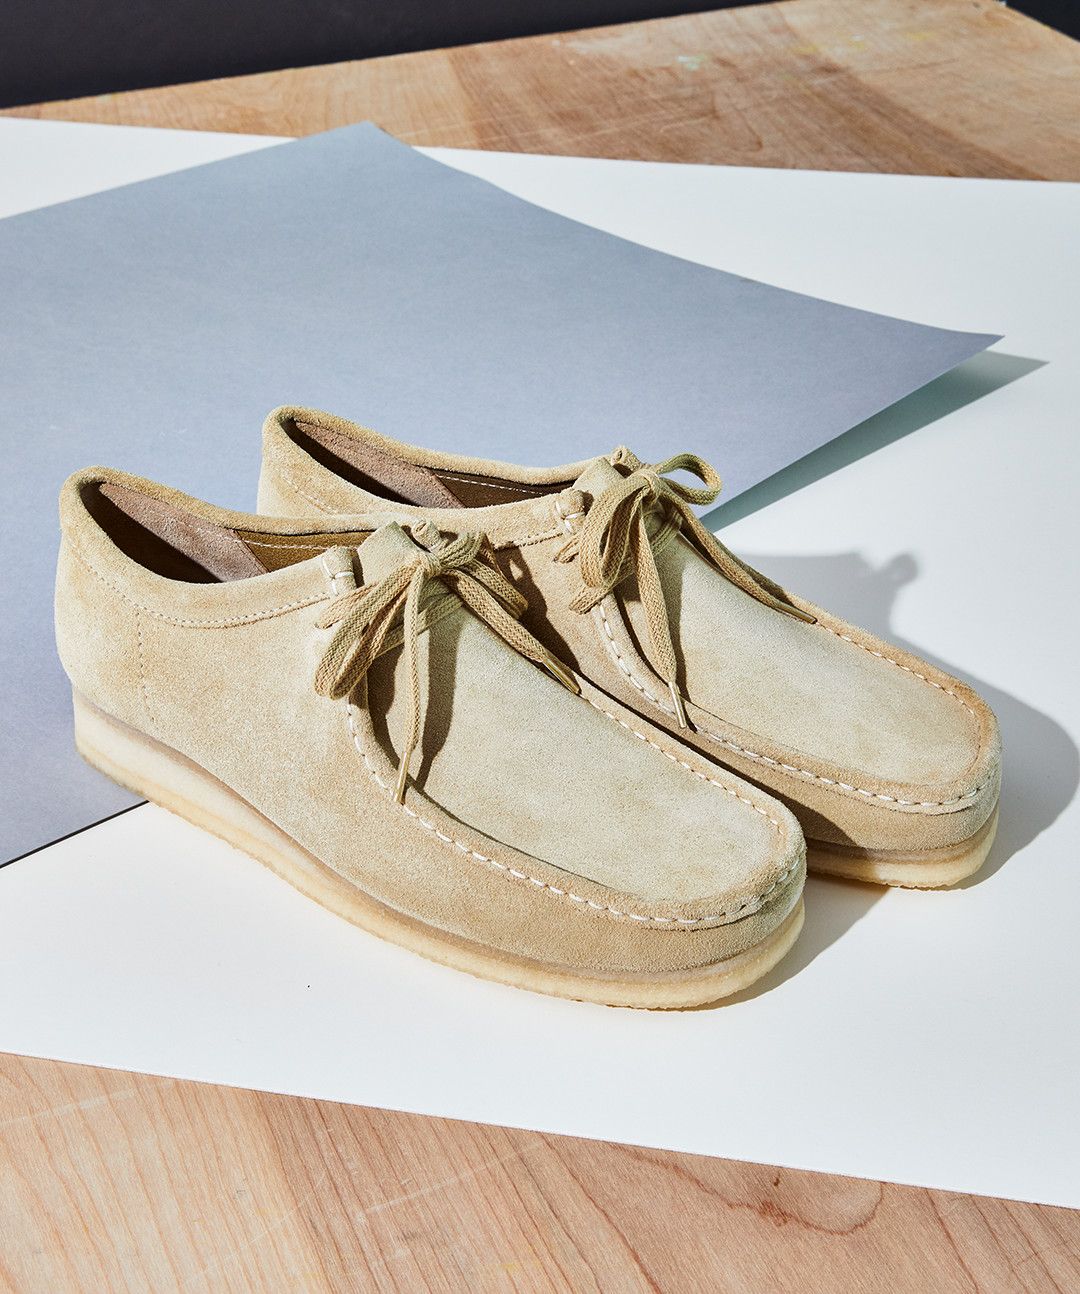 Clarks Originals Wallabee Review and 